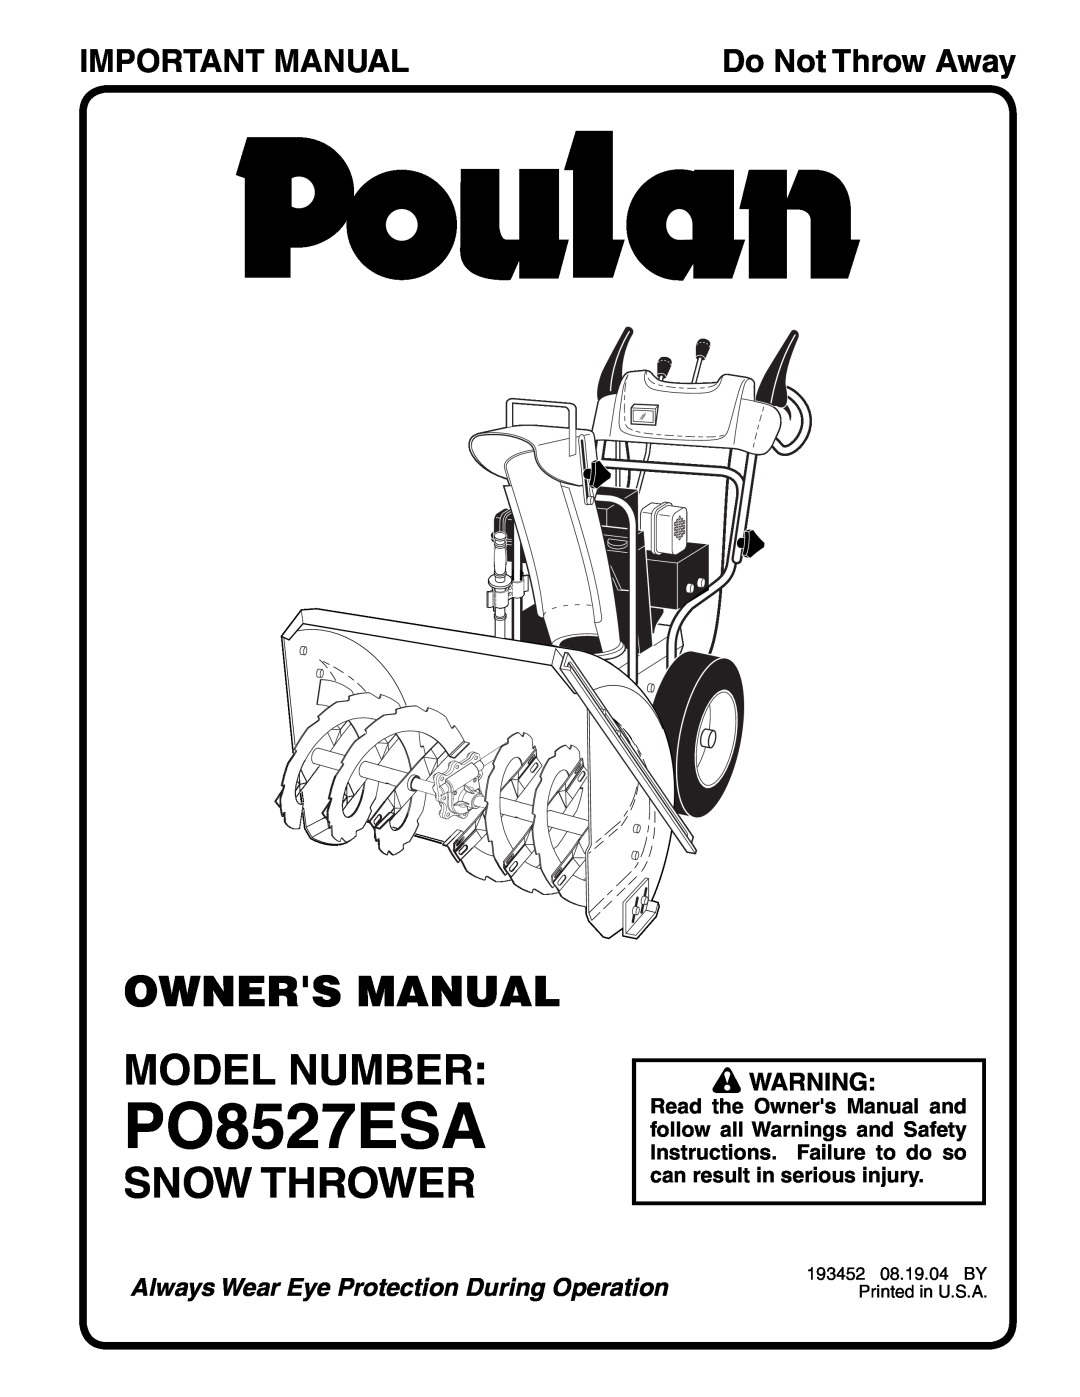 Poulan PO8527ESA owner manual Owners Manual Model Number, Snow Thrower, Important Manual, Do Not Throw Away 